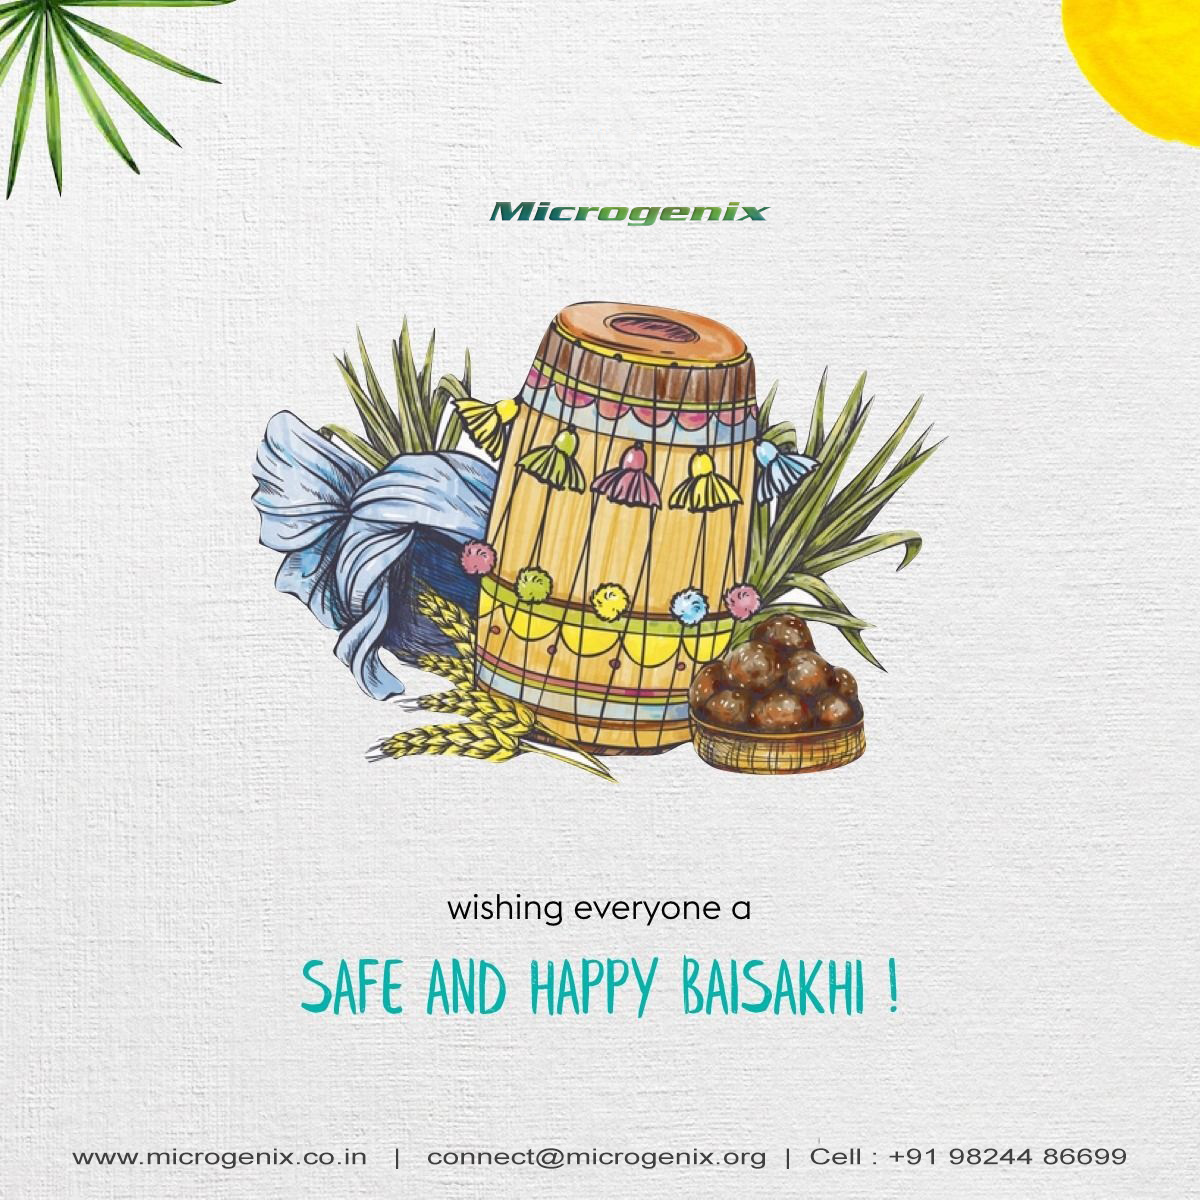 May this beautiful and auspicious day bring happiness,
Fill your loved ones with laughter till eternity.

#HappyBaisakhi #Baisakhi #Baisakhi2023 #Silicone #Enzyme #innovation #sustainablesolutions #GoGreen #MadeInGreen #Sustainability #ObsessedWithQuality #Microgenix